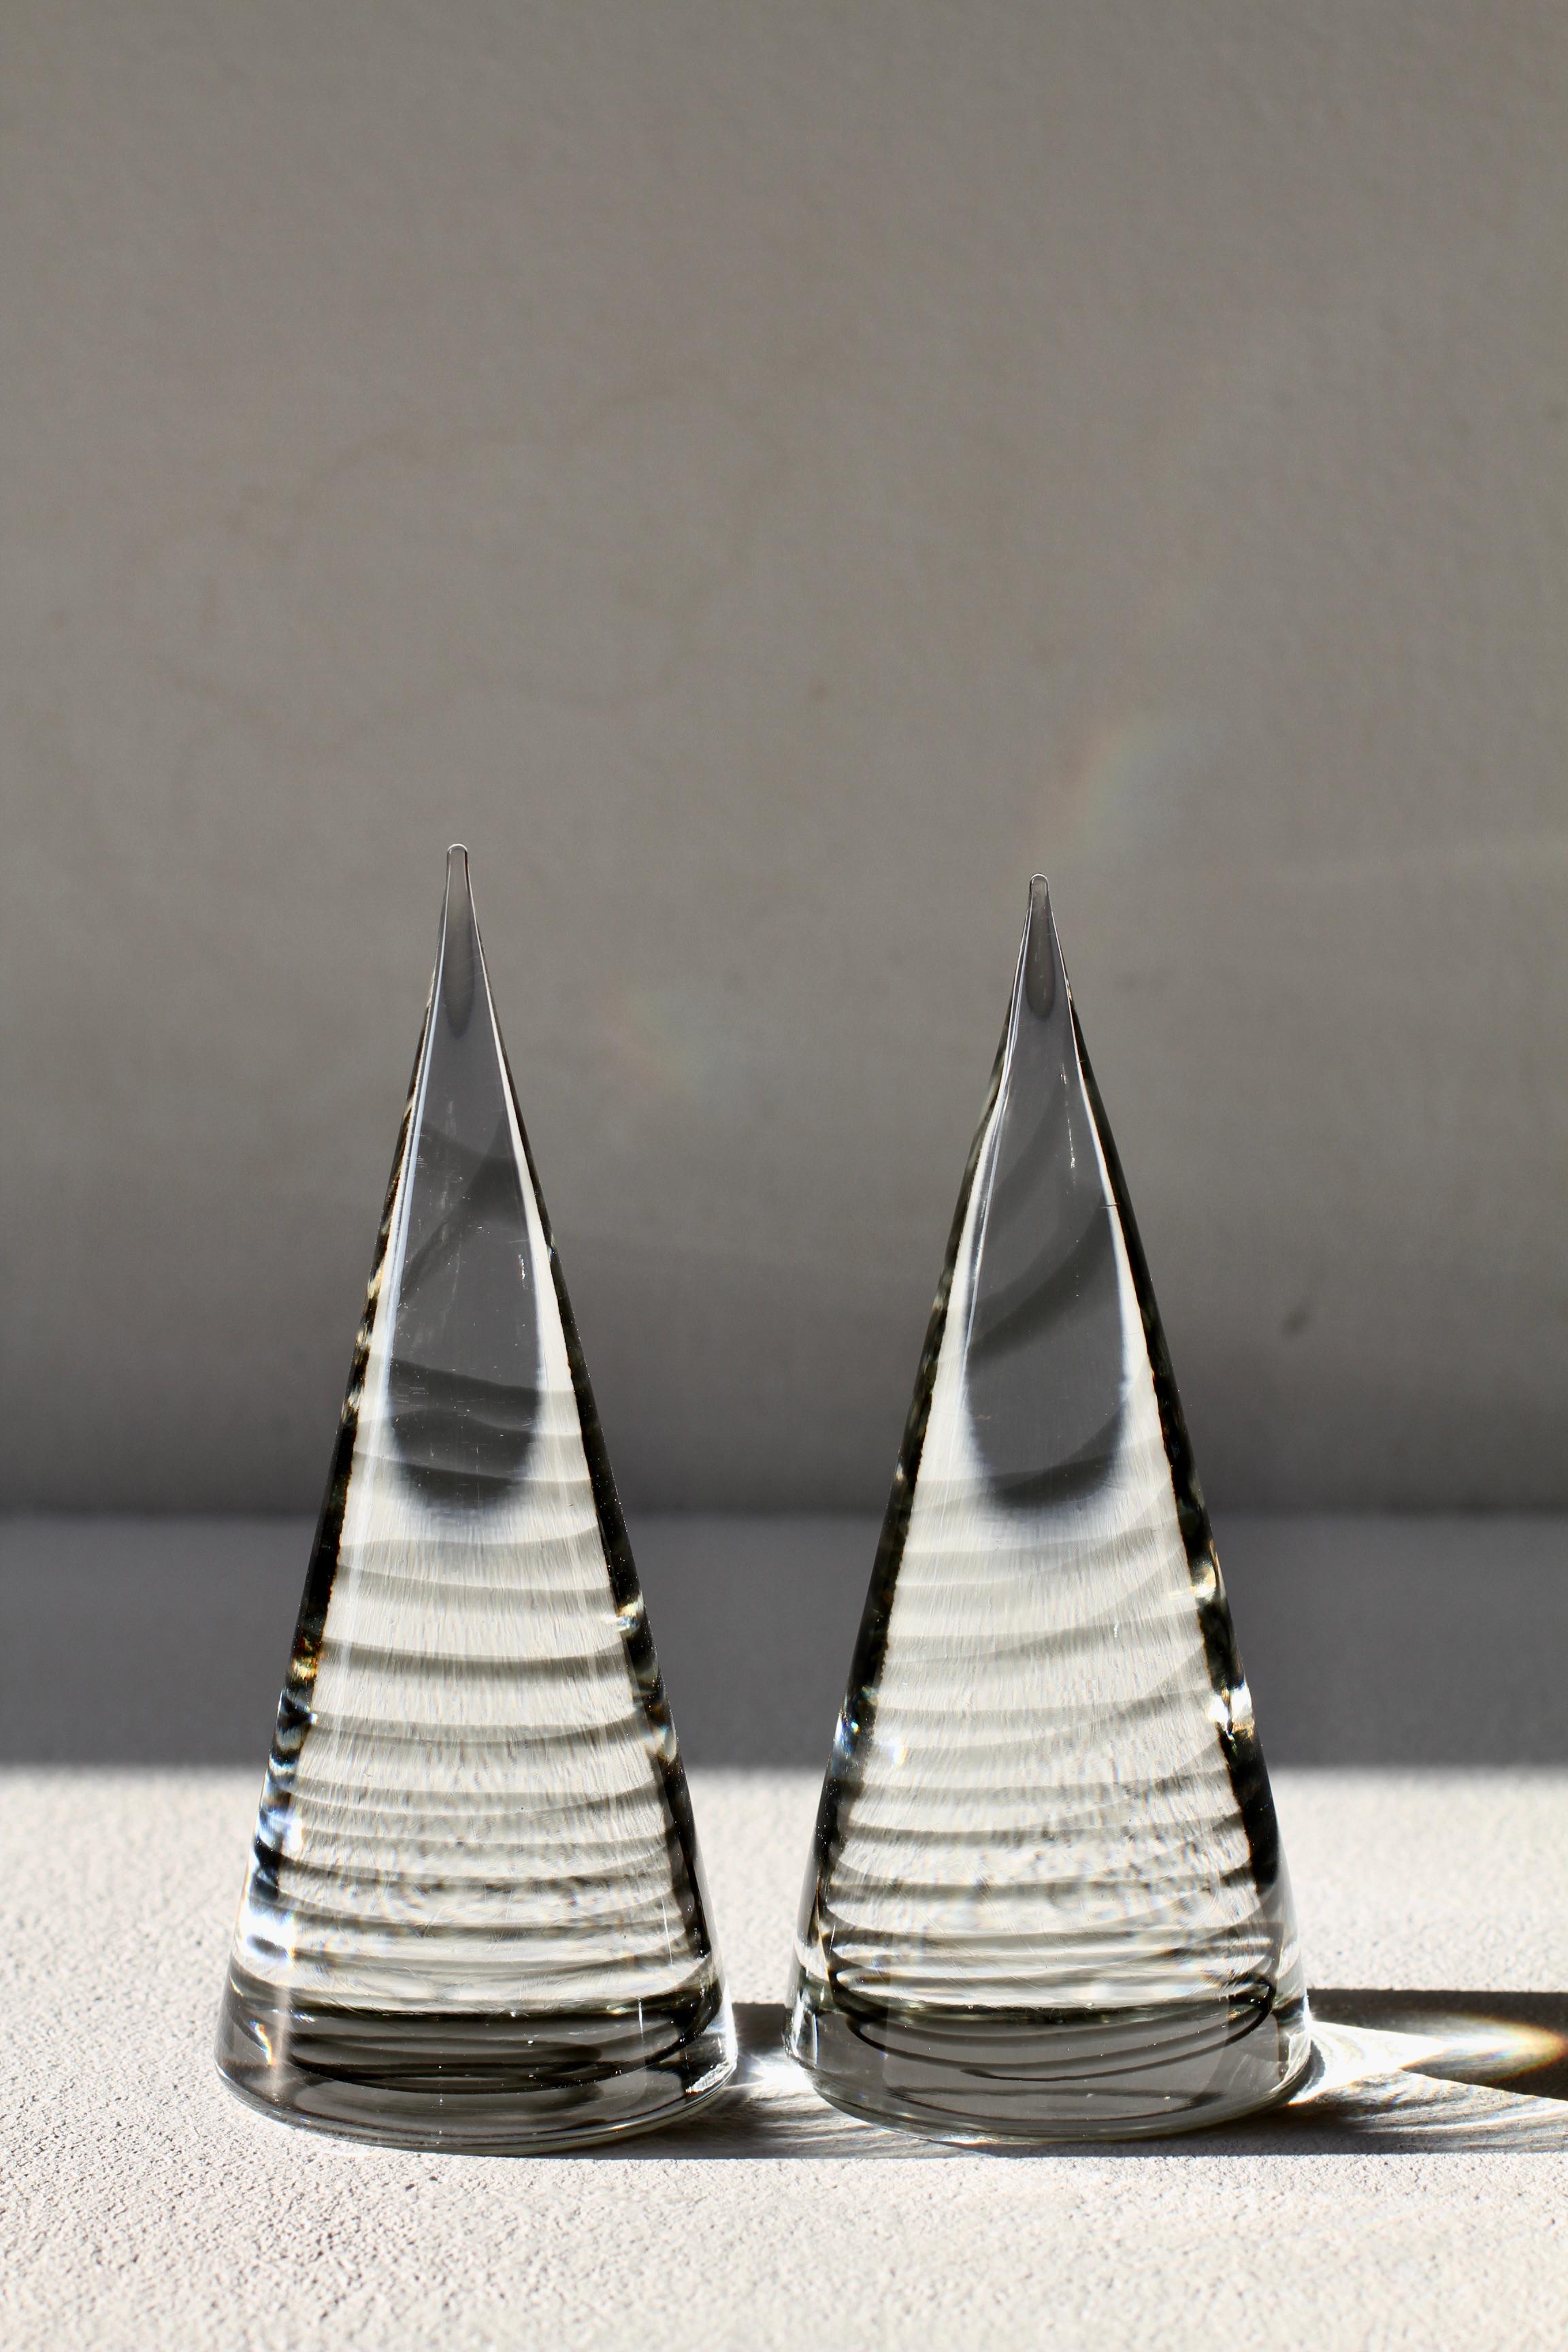 Rare pair of Mid-Century Modern vintage signed cone shaped paperweights with grey spiral inclusion within the clear glass. The design of this conical shaped desk paperweight / ornament is attributed to master Murano glass designer Antonio da Ros for